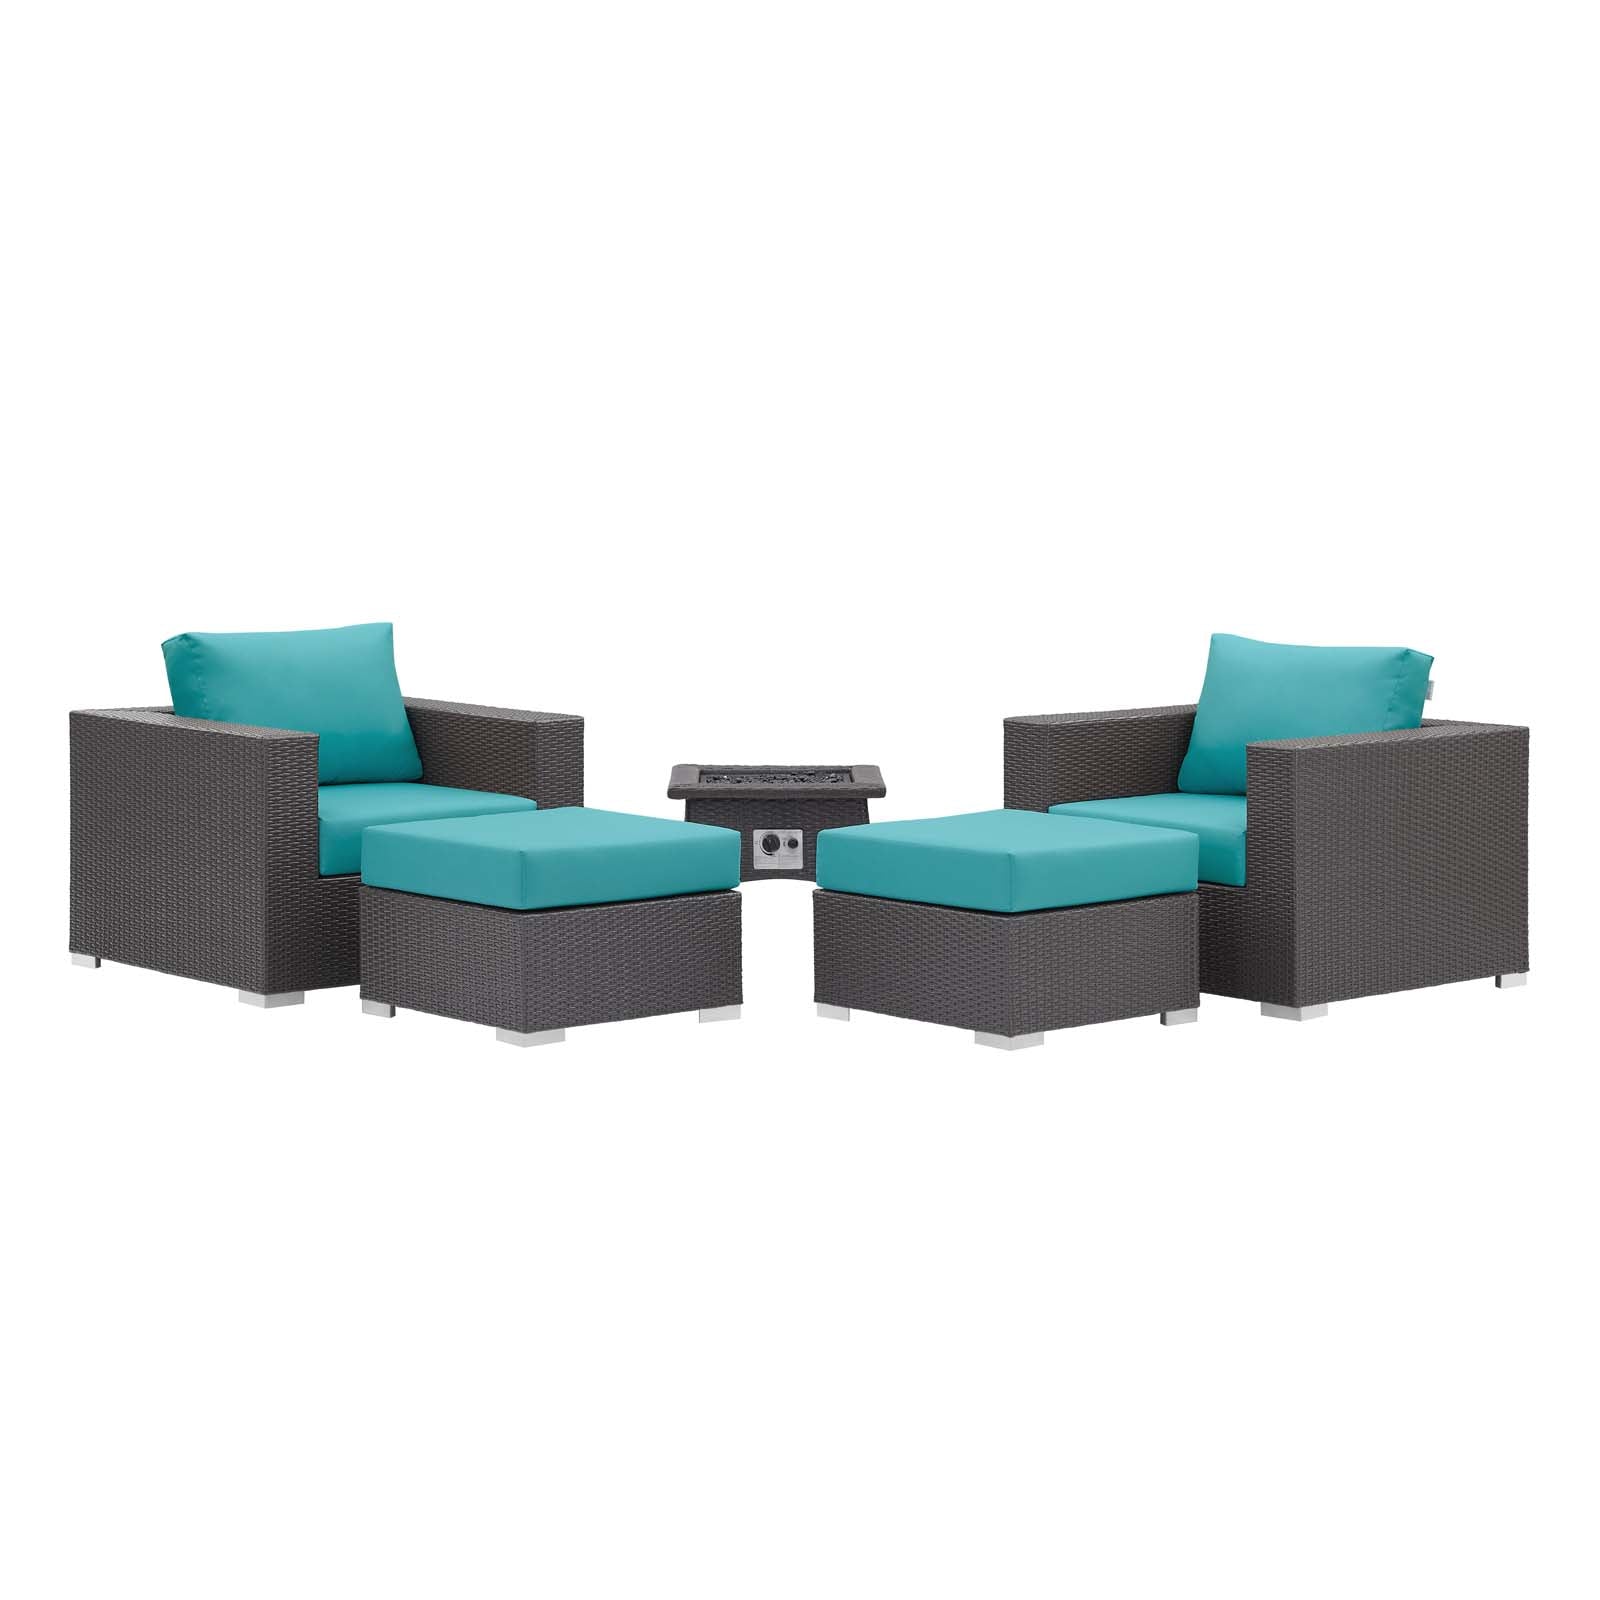 Modway Outdoor Conversation Sets - Convene 5 Piece Set Outdoor Patio with Fire Pit Espresso Turquoise